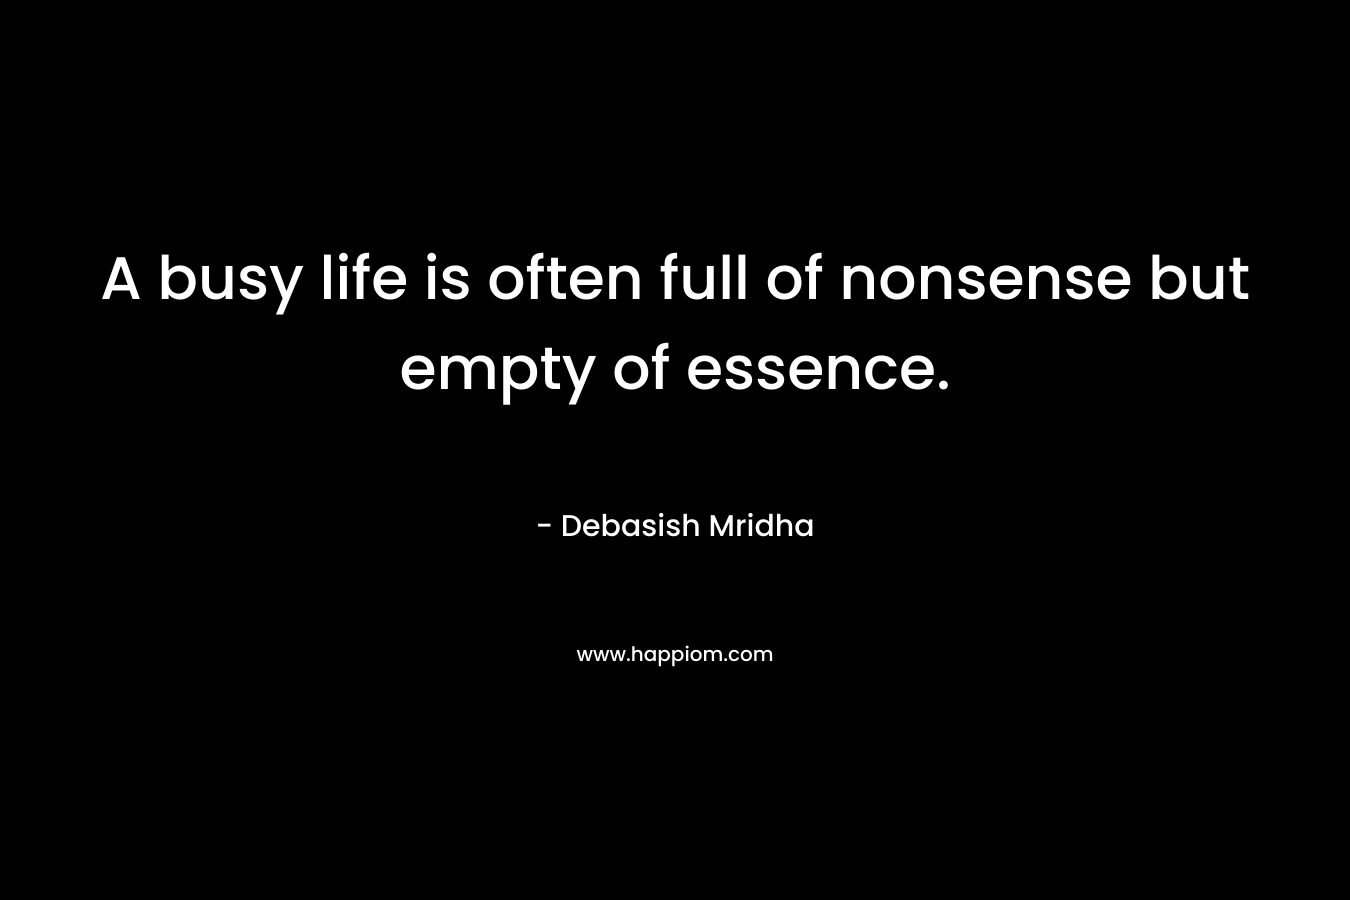 A busy life is often full of nonsense but empty of essence.